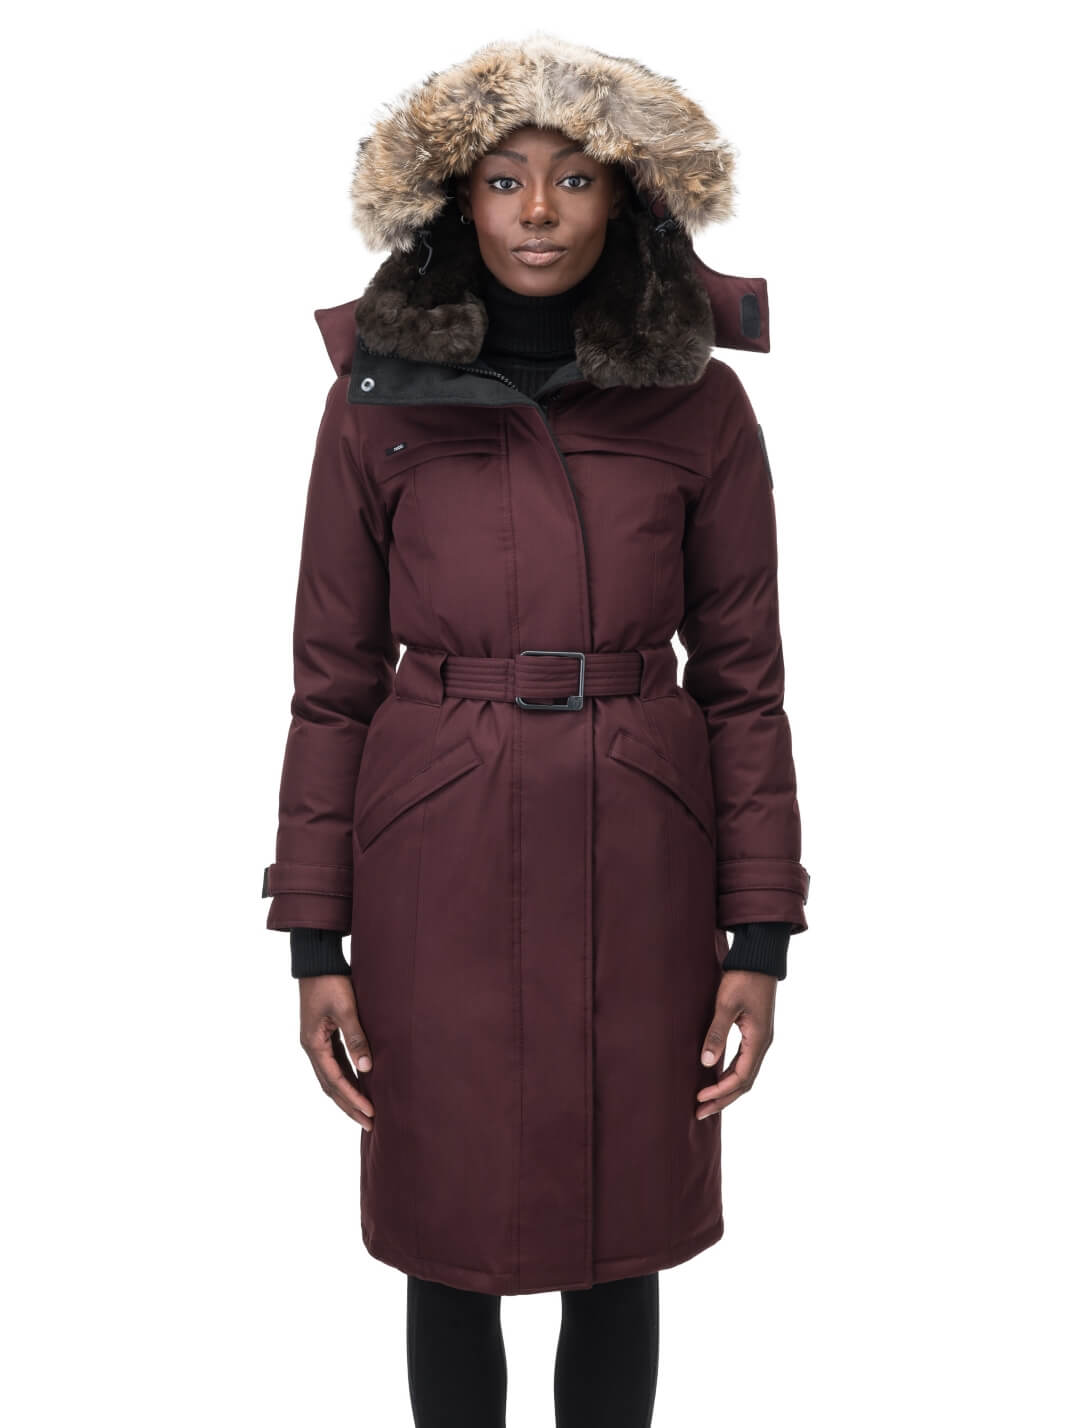 Women's knee length down filled parka with a belted waist and fully removable Coyote and Rex Rabbit fur ruffs in Merlot